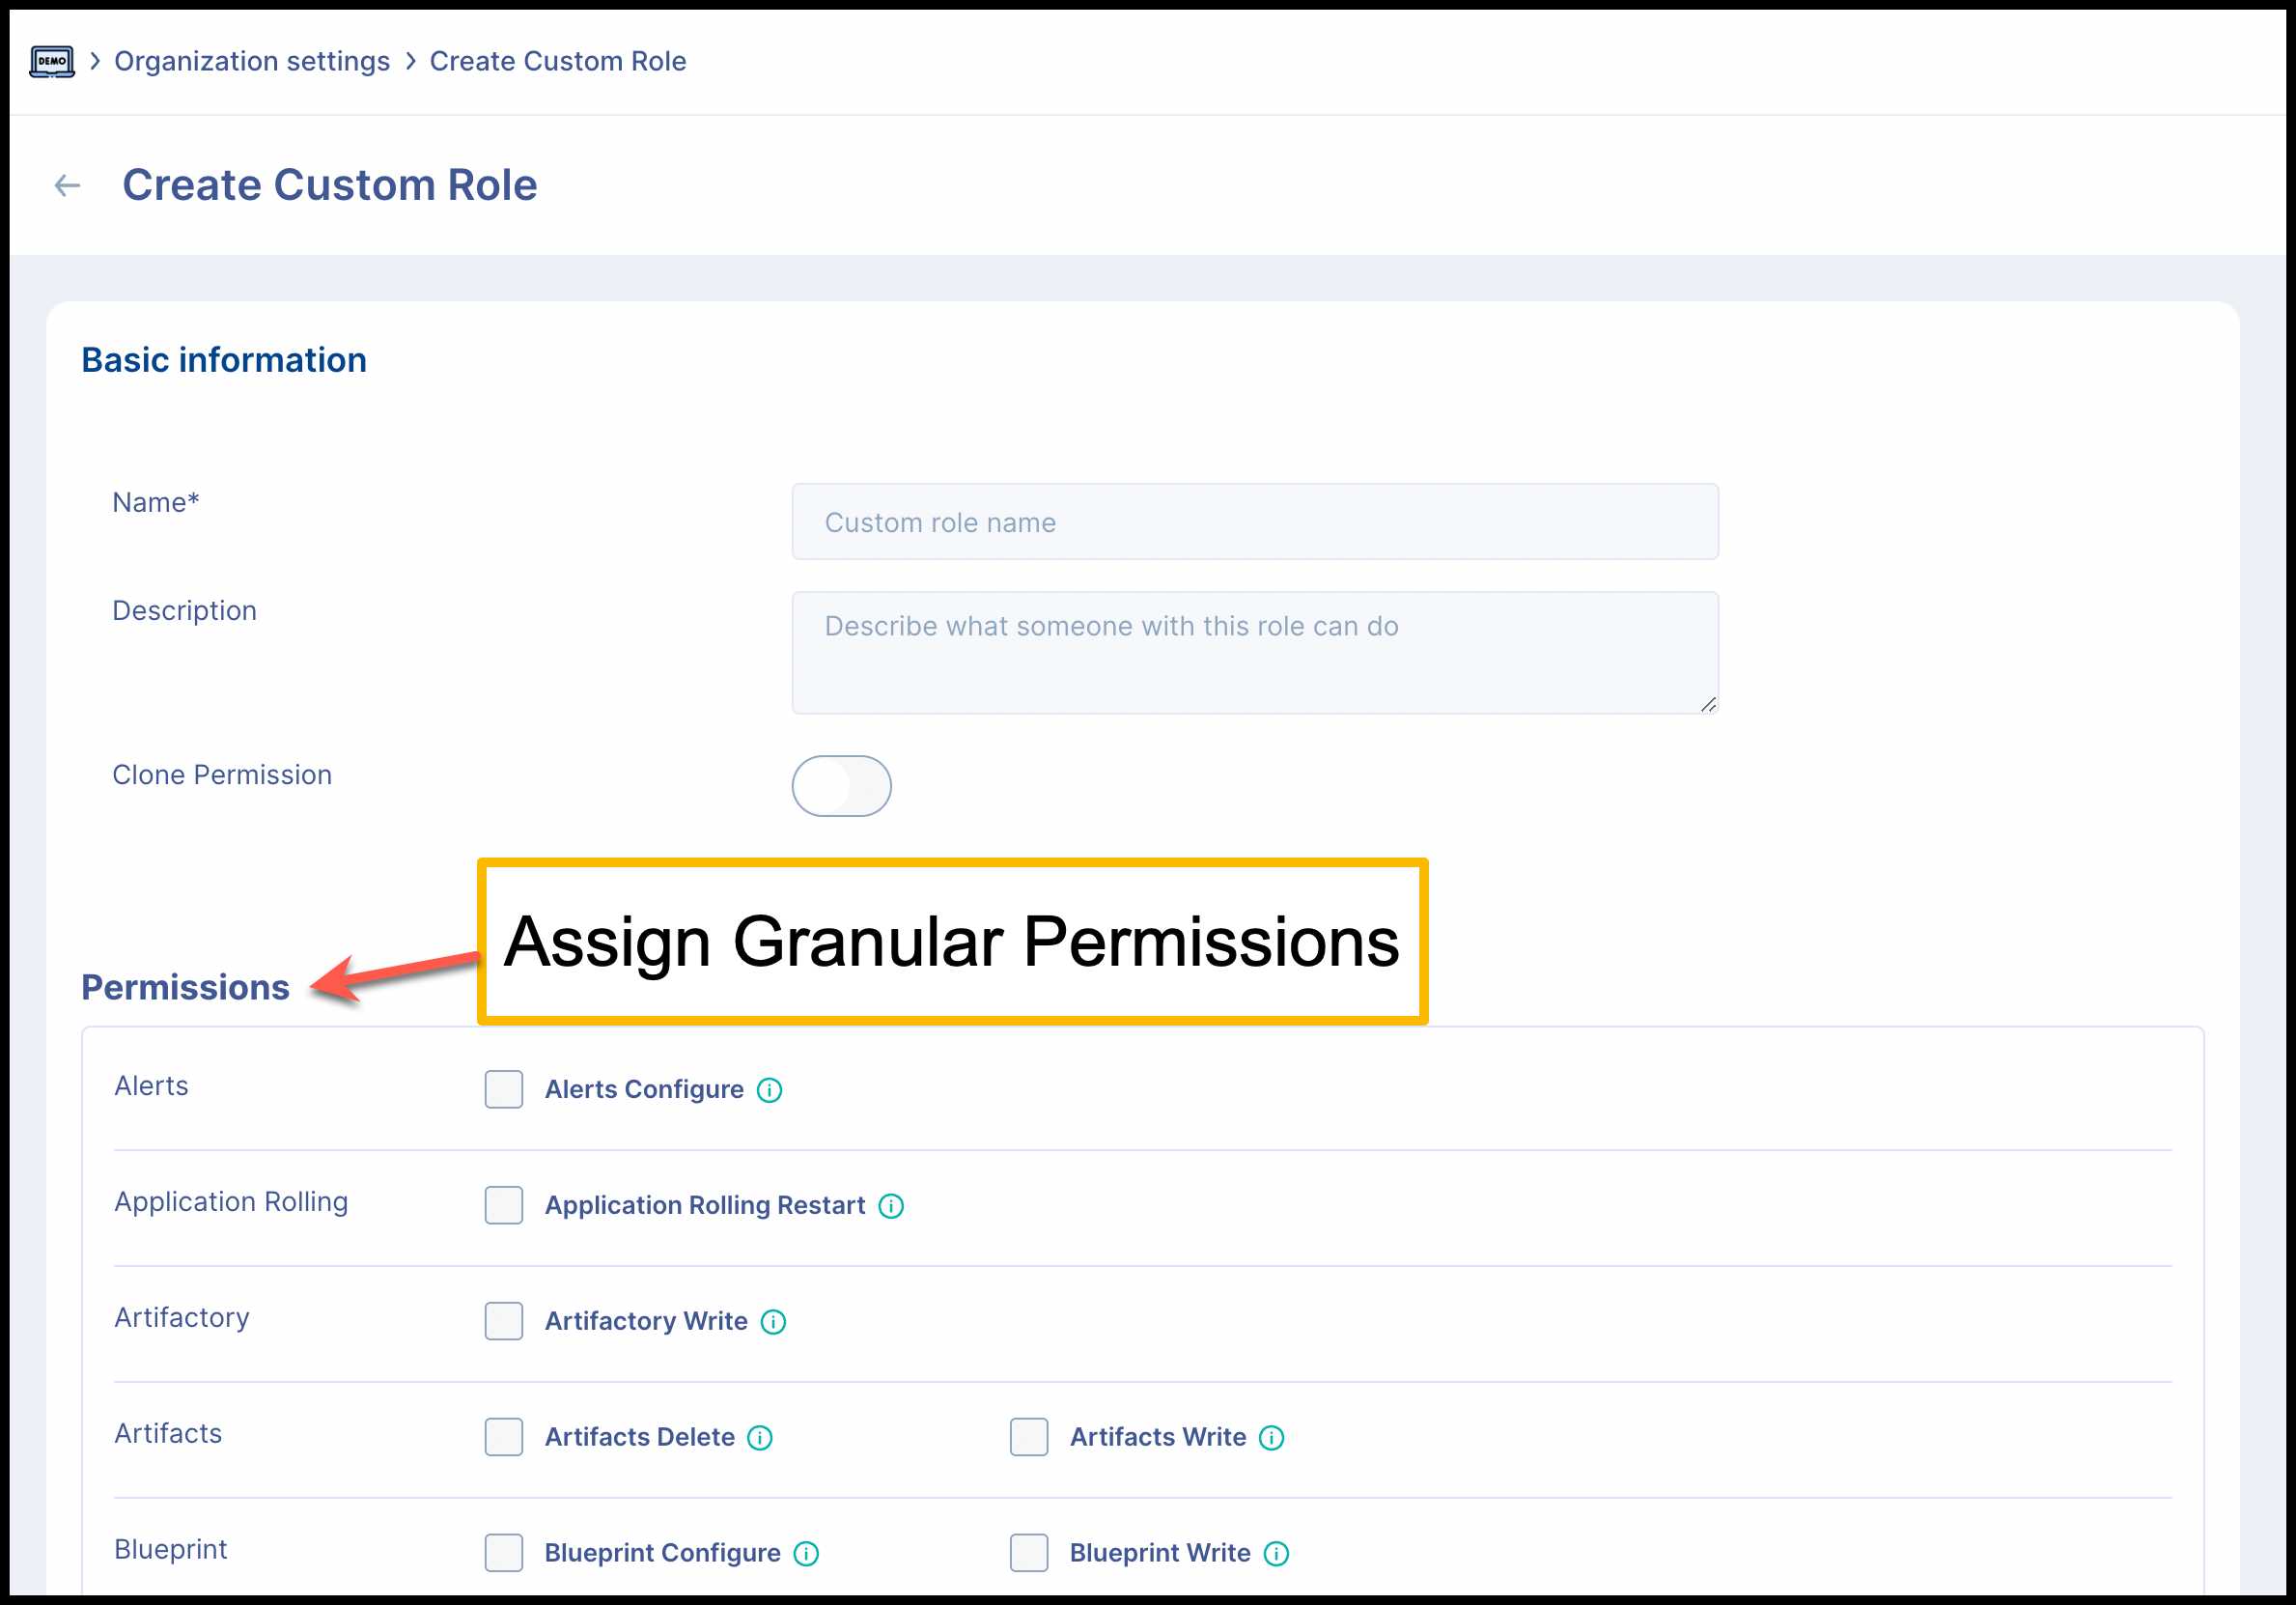 Assign specific Permissions for a Custom Role